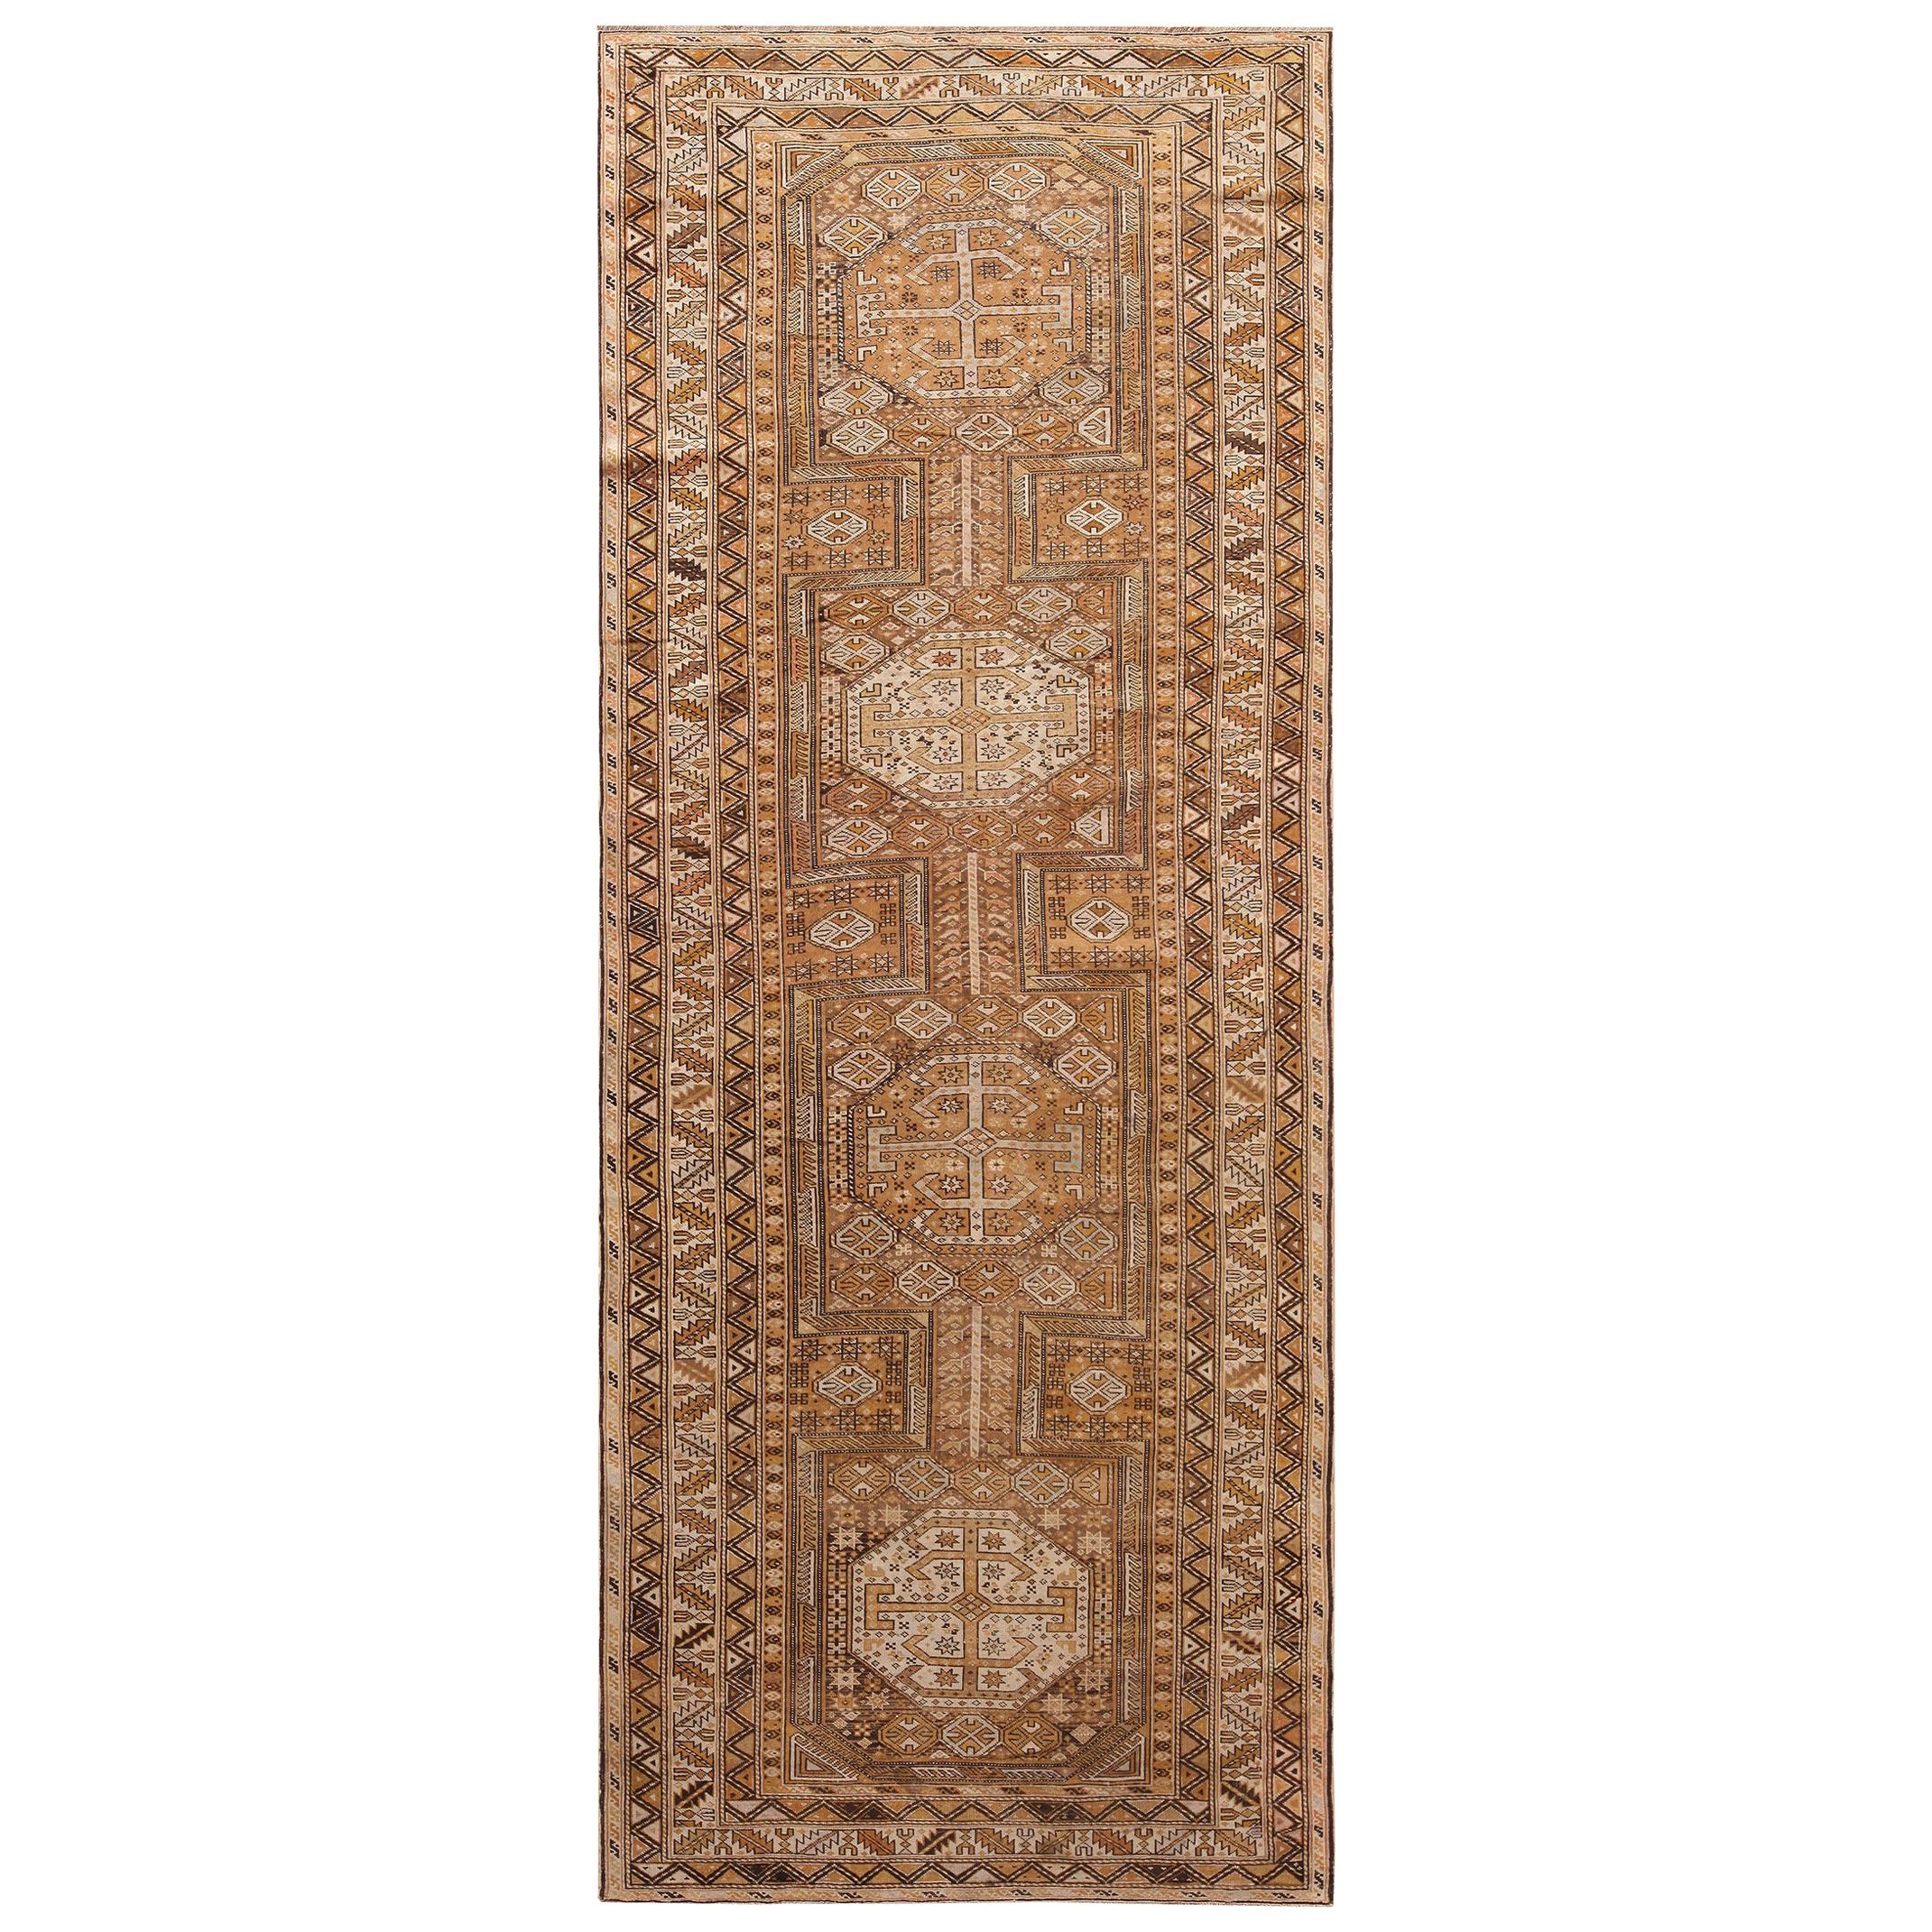 Gallery Size Tribal Antique Caucasian Shirvan Rug. Size: 4 ft 3 in x 10 ft 9 in